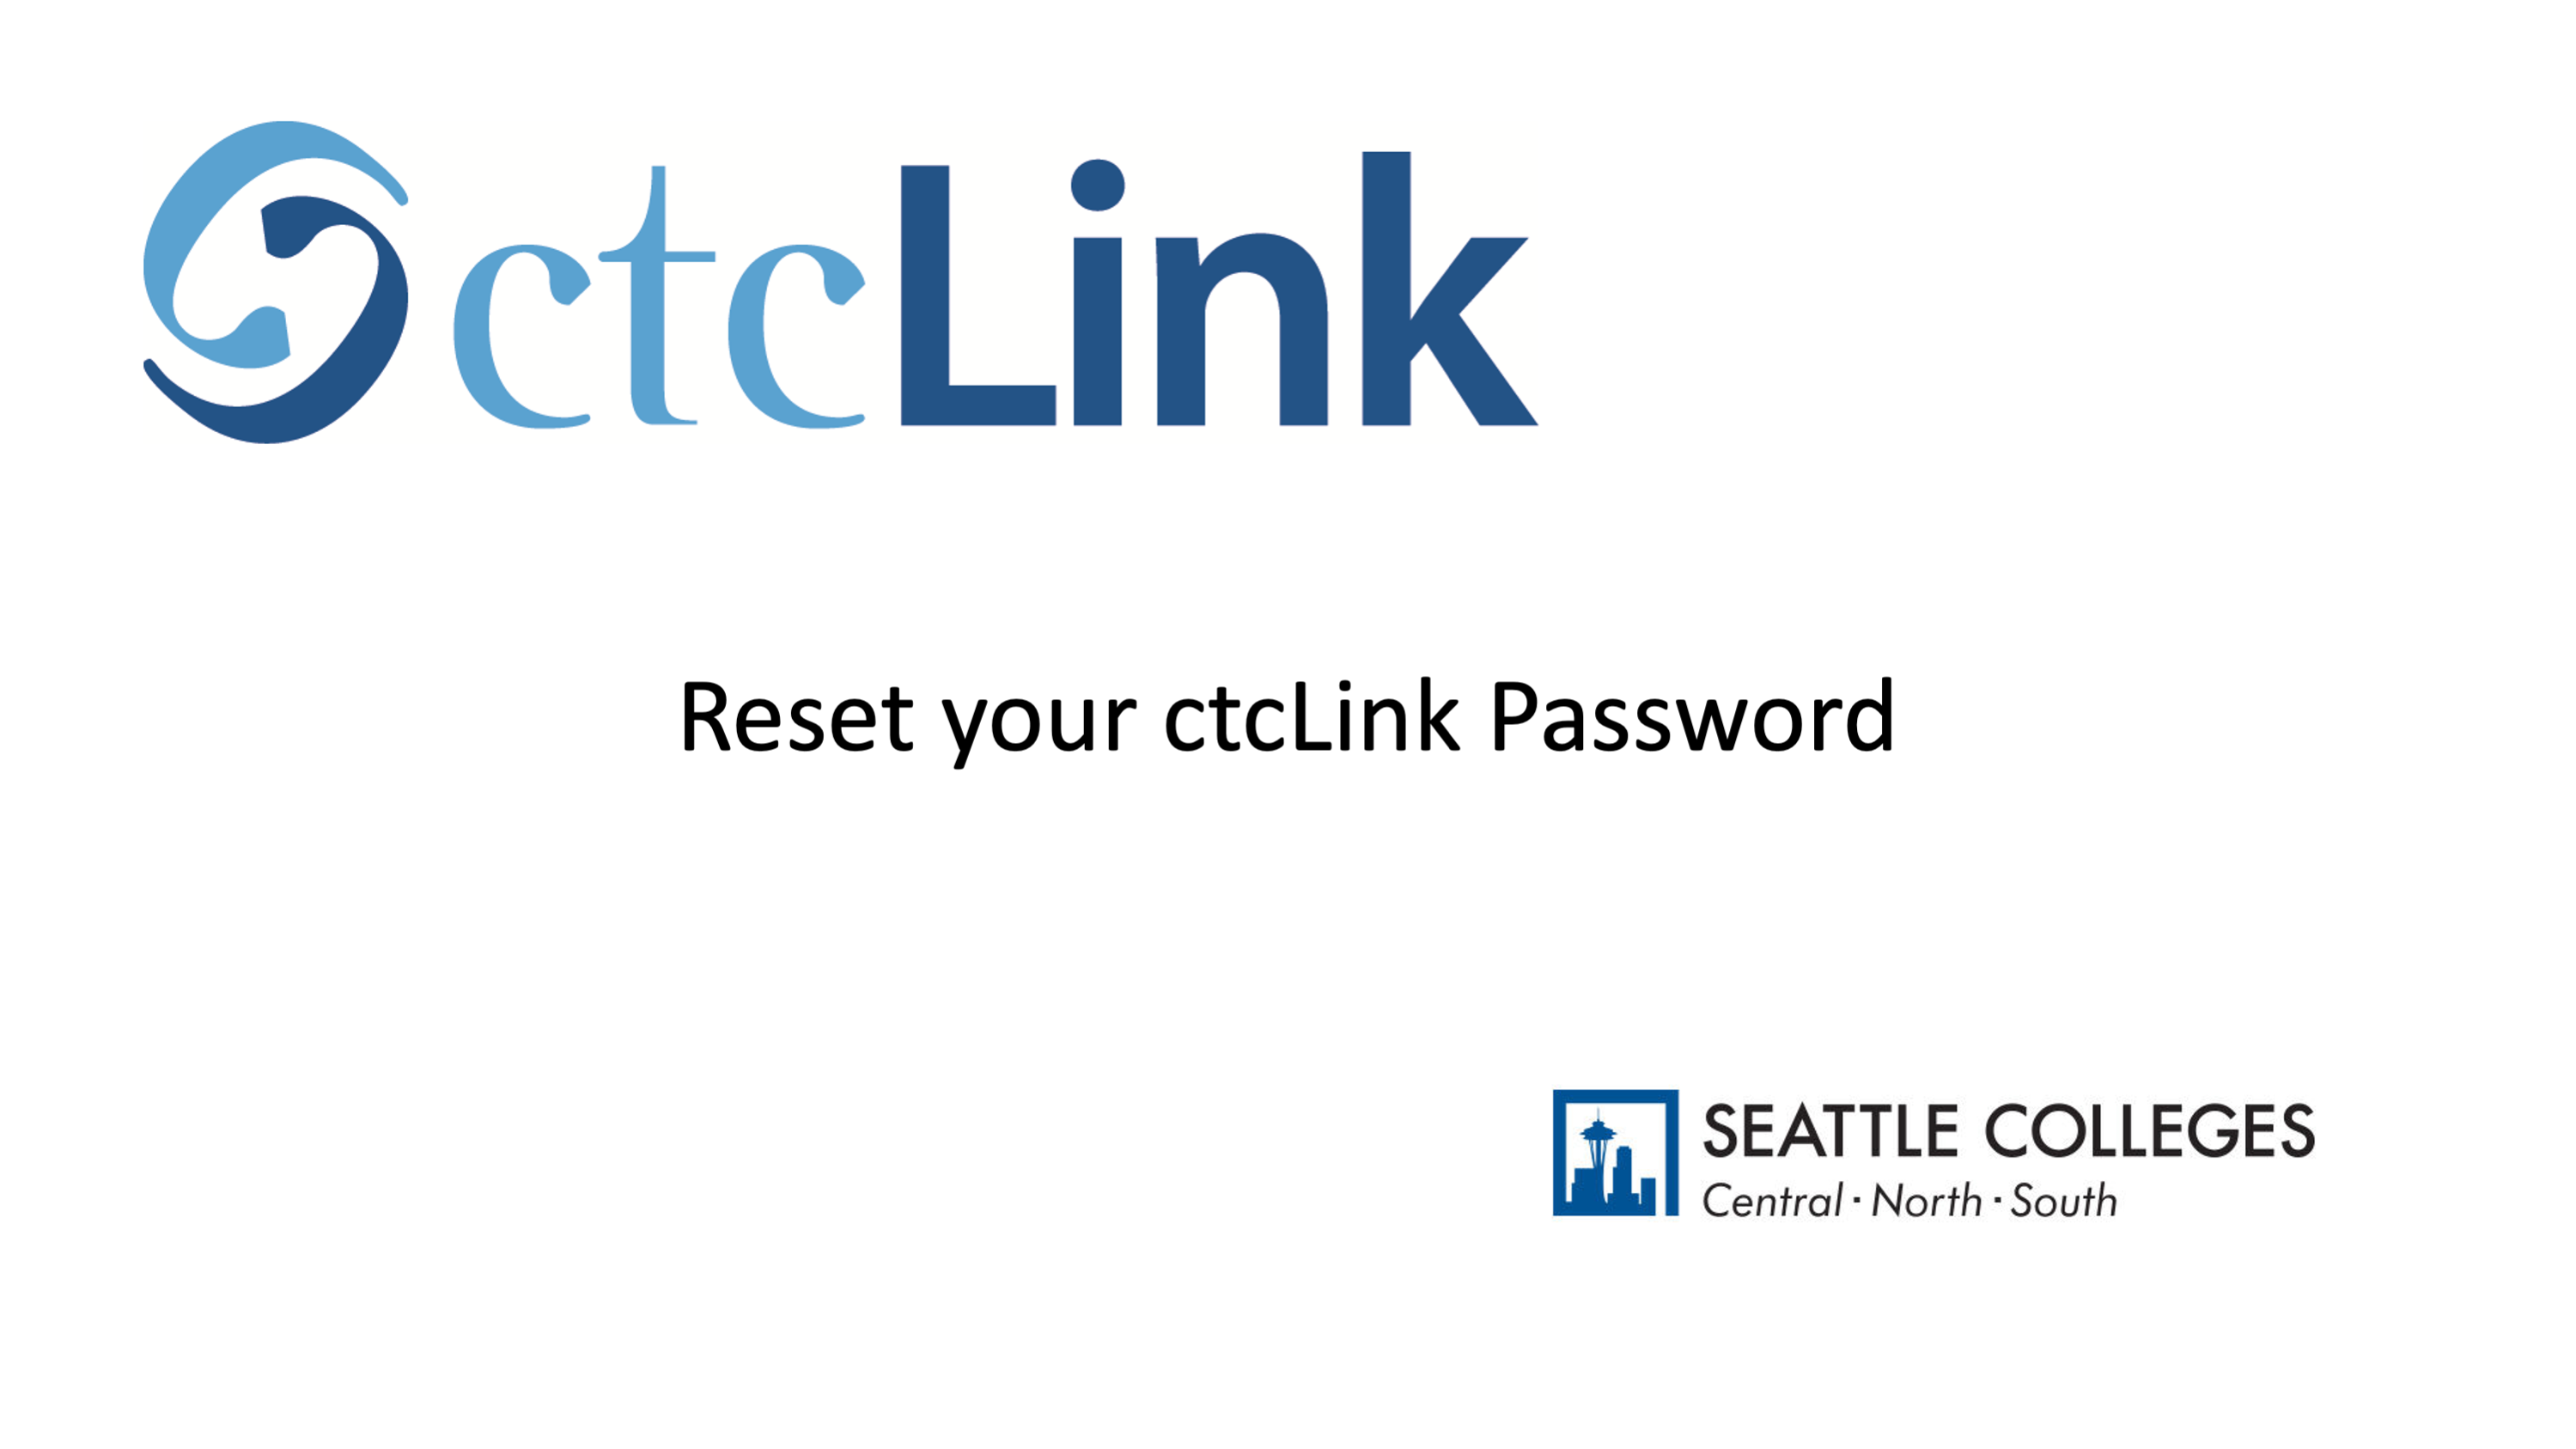 Reset your ctcLink Account Password for Seattle Colleges